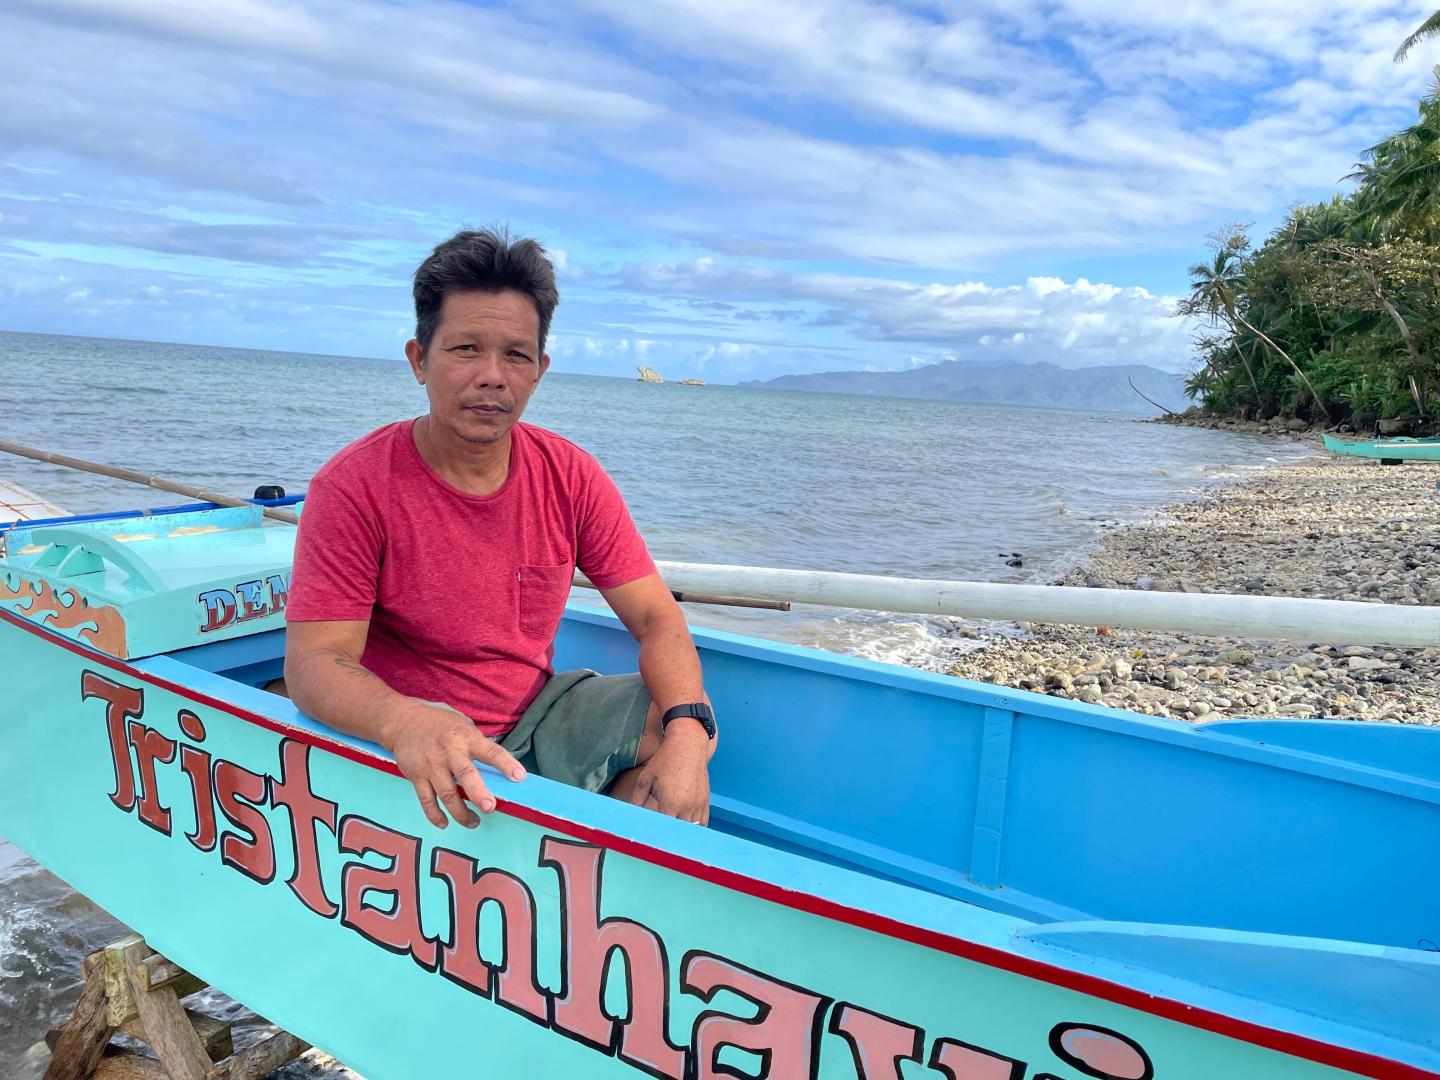 Patrick Quiban sitting in a blue boat